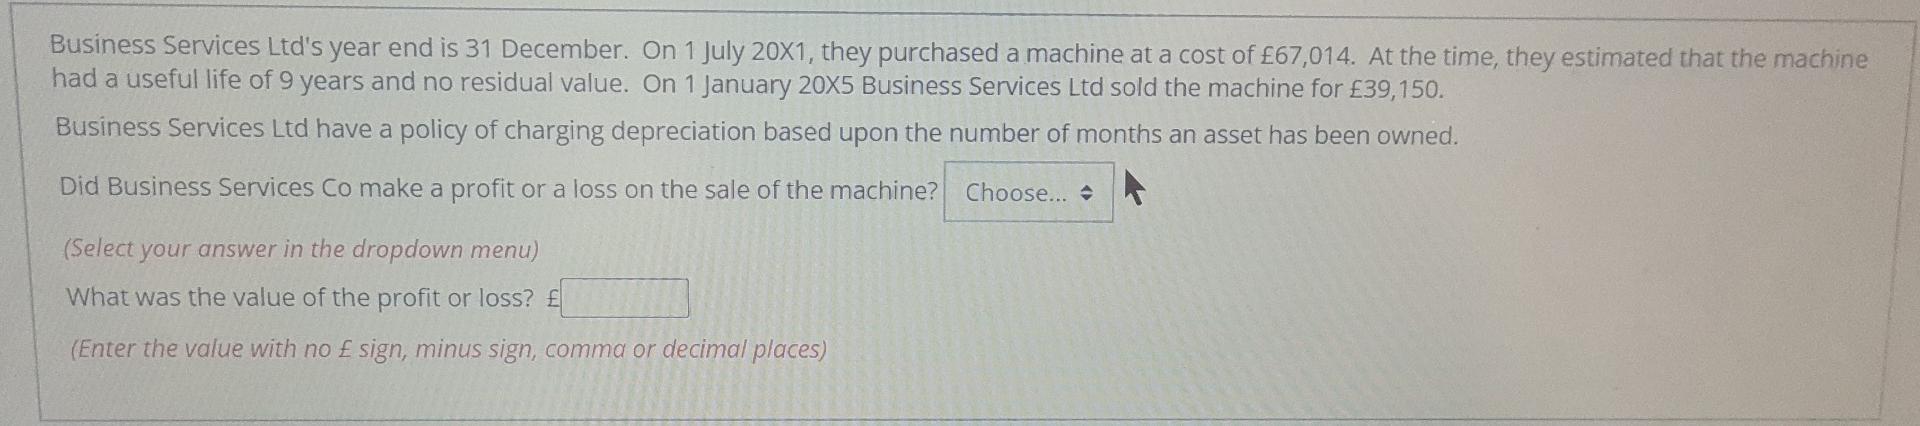 Business Services Ltd's year end is 31 December. On 1 July 20X1, they purchased a machine at a cost of